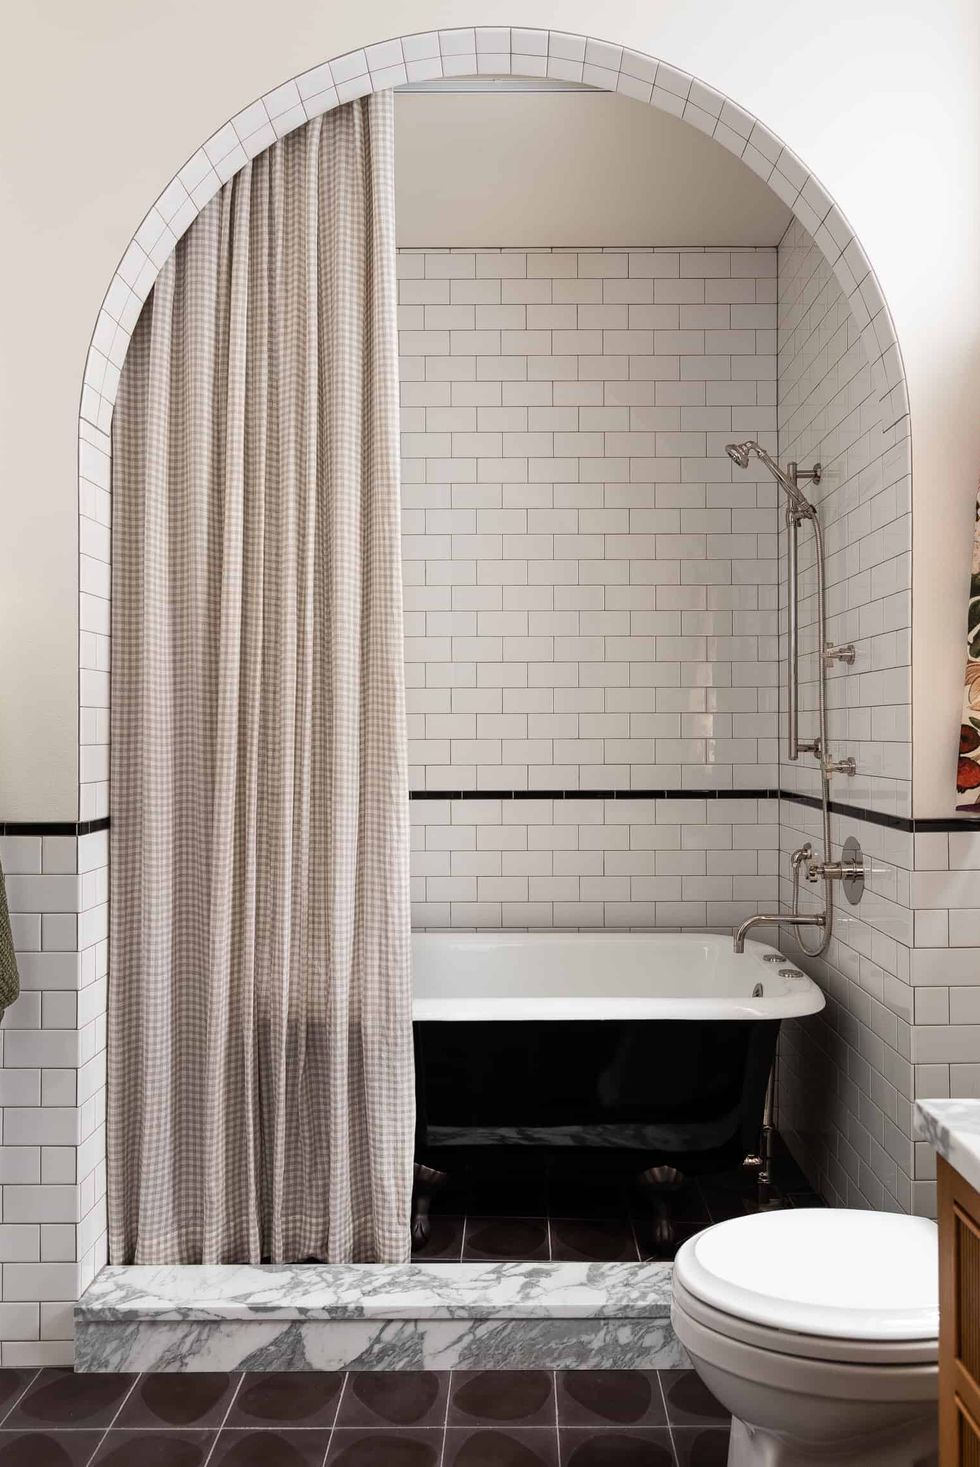 does this shower/privacy curtain draping-from-trunk concept exist